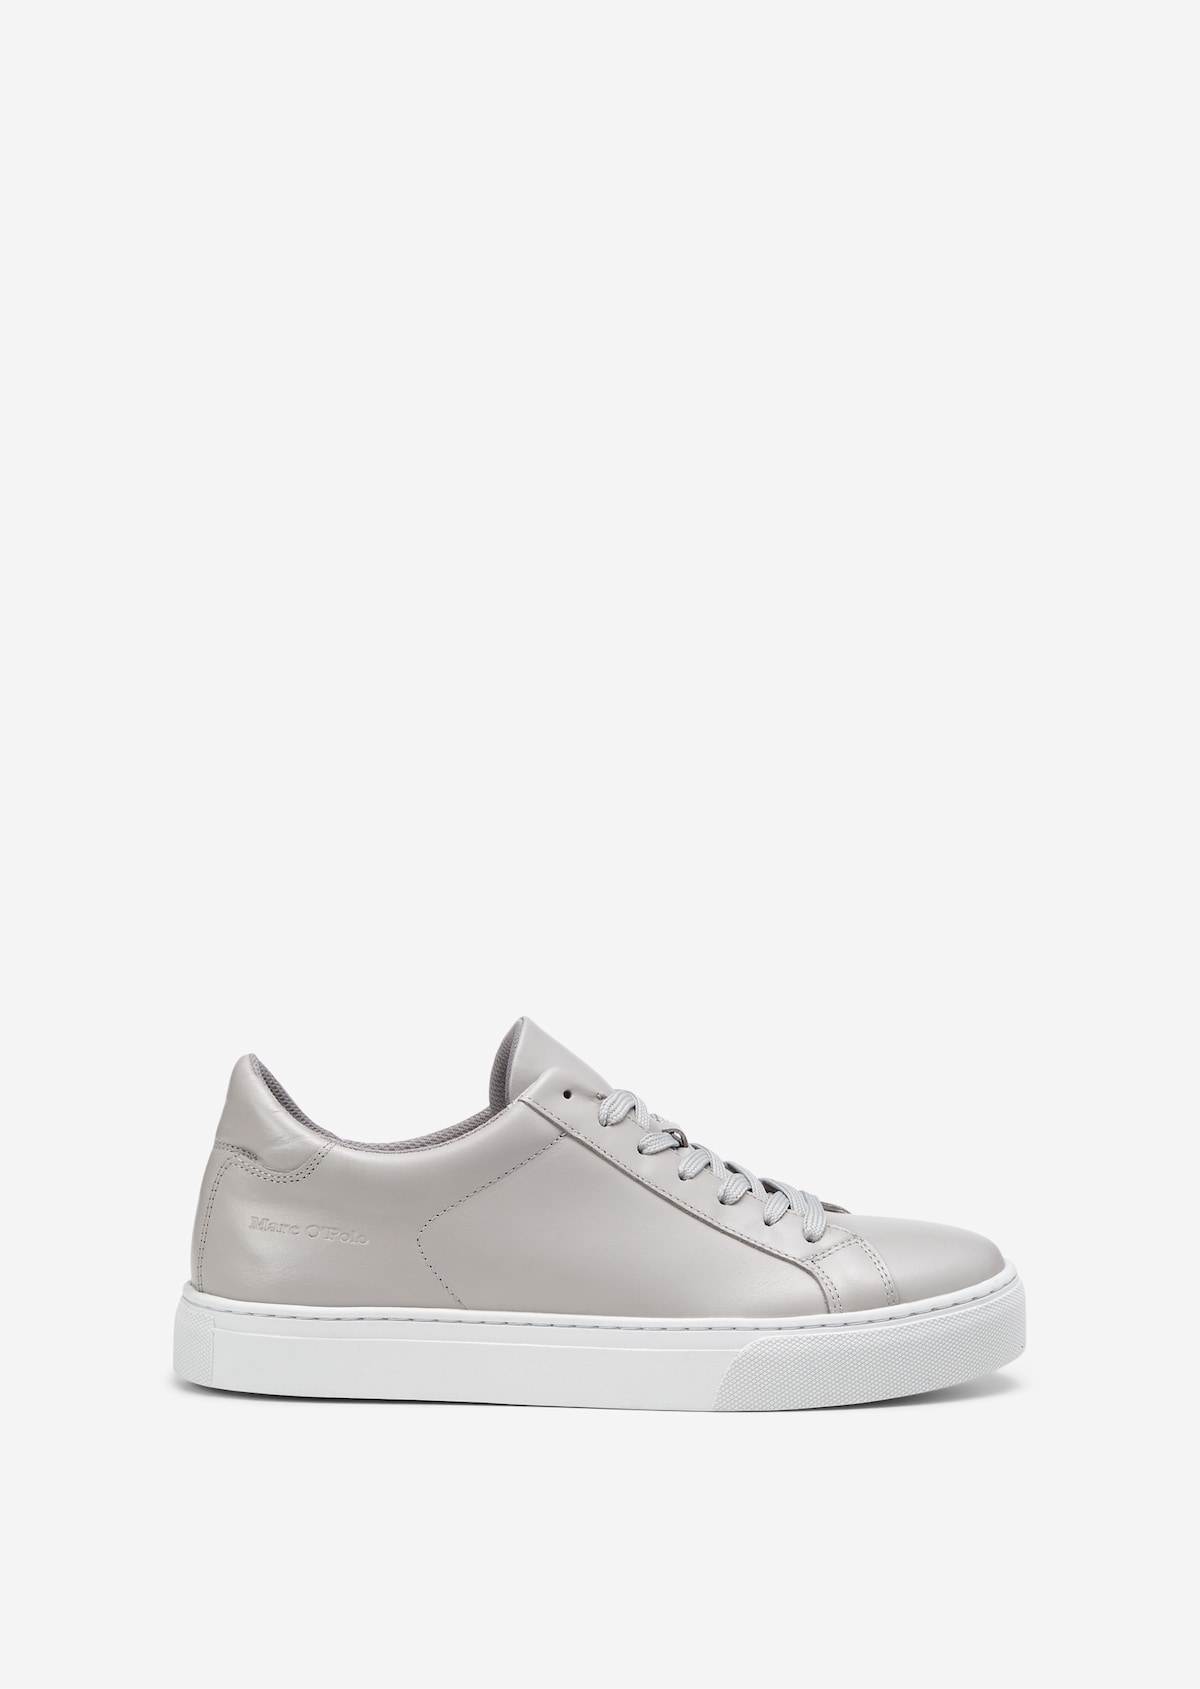 Cup sole sneaker made from fine cowhide nappa leather - gray | Sneakers ...